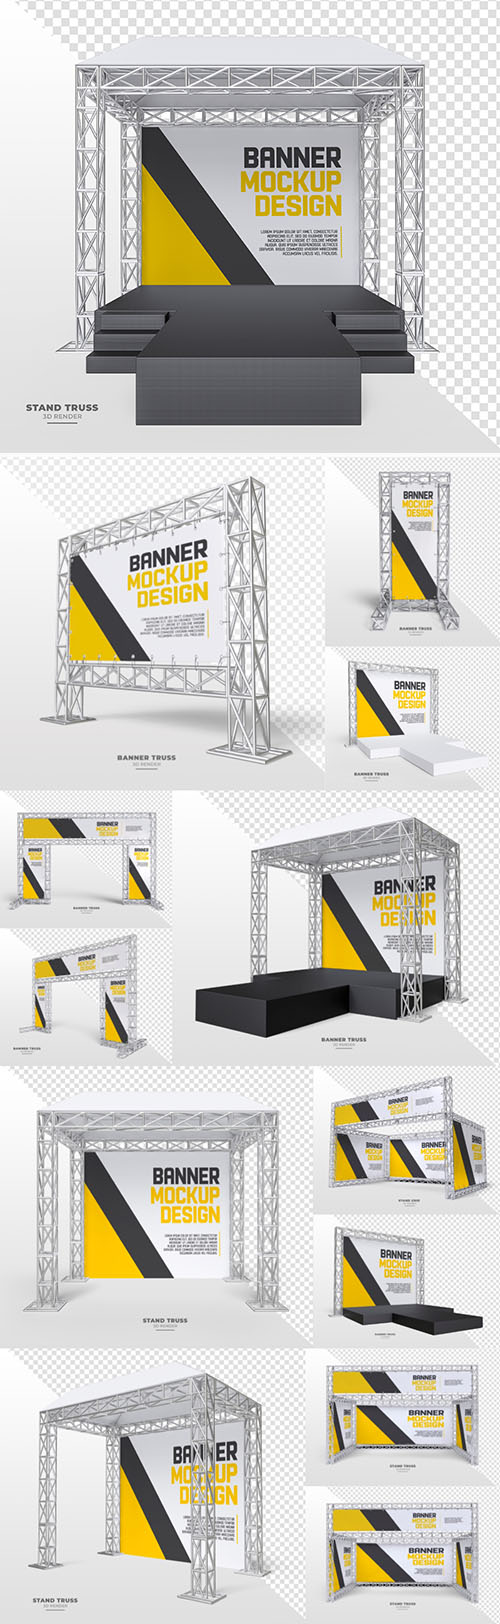 Outdoor advertising banner set with realistic metal truss system black and yellow[PSD]